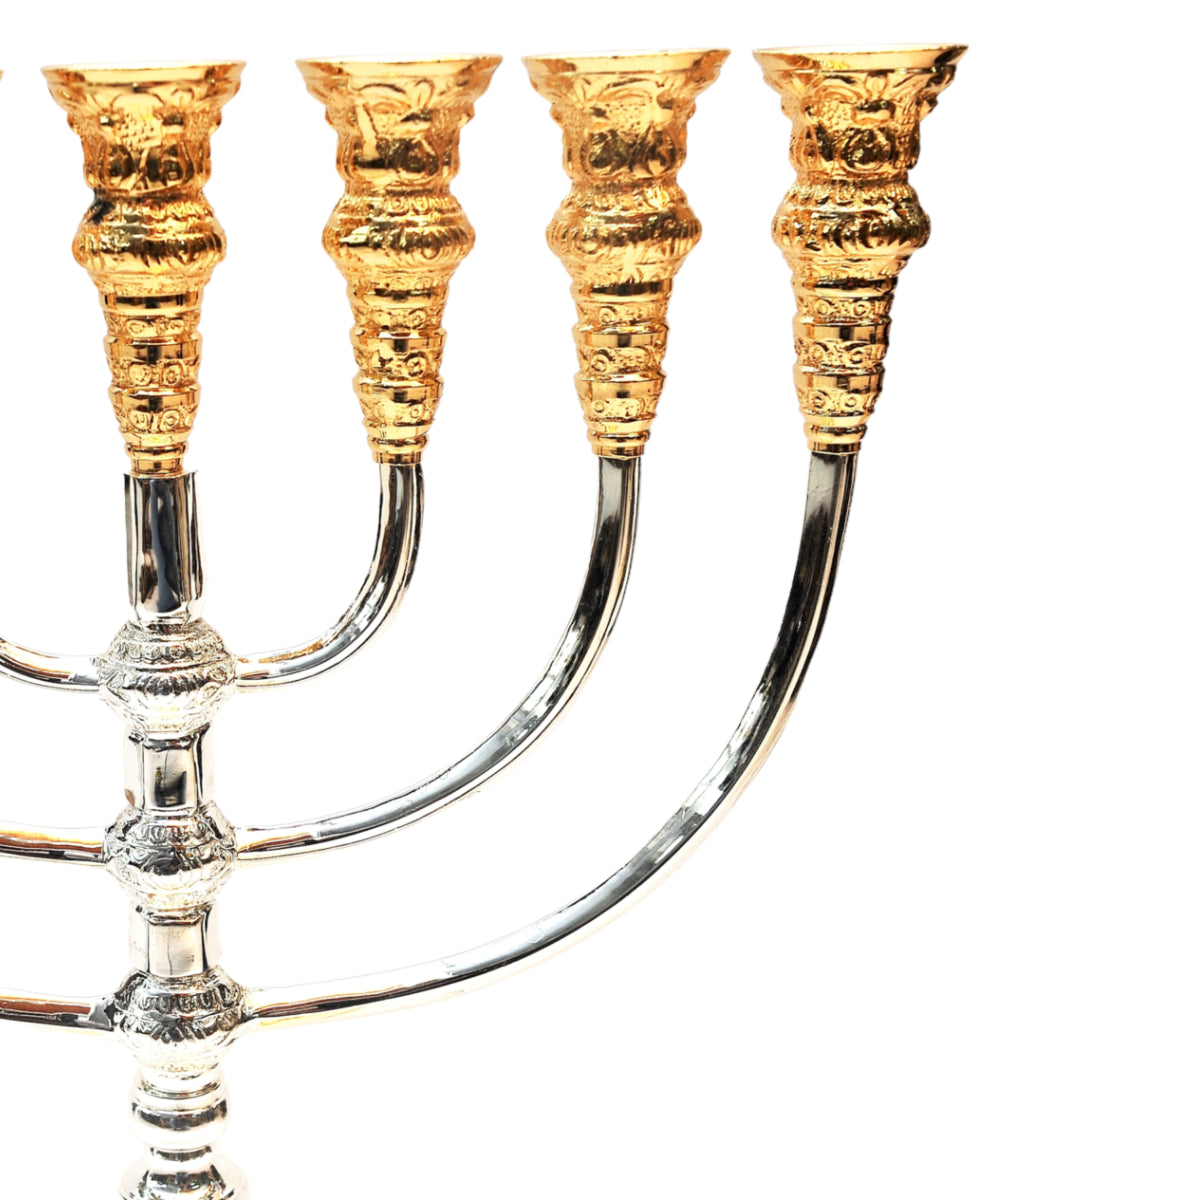 Temple Menorah Gold and Silver Plated Candle Holder from Jerusalem 18.5″ / 47 cm